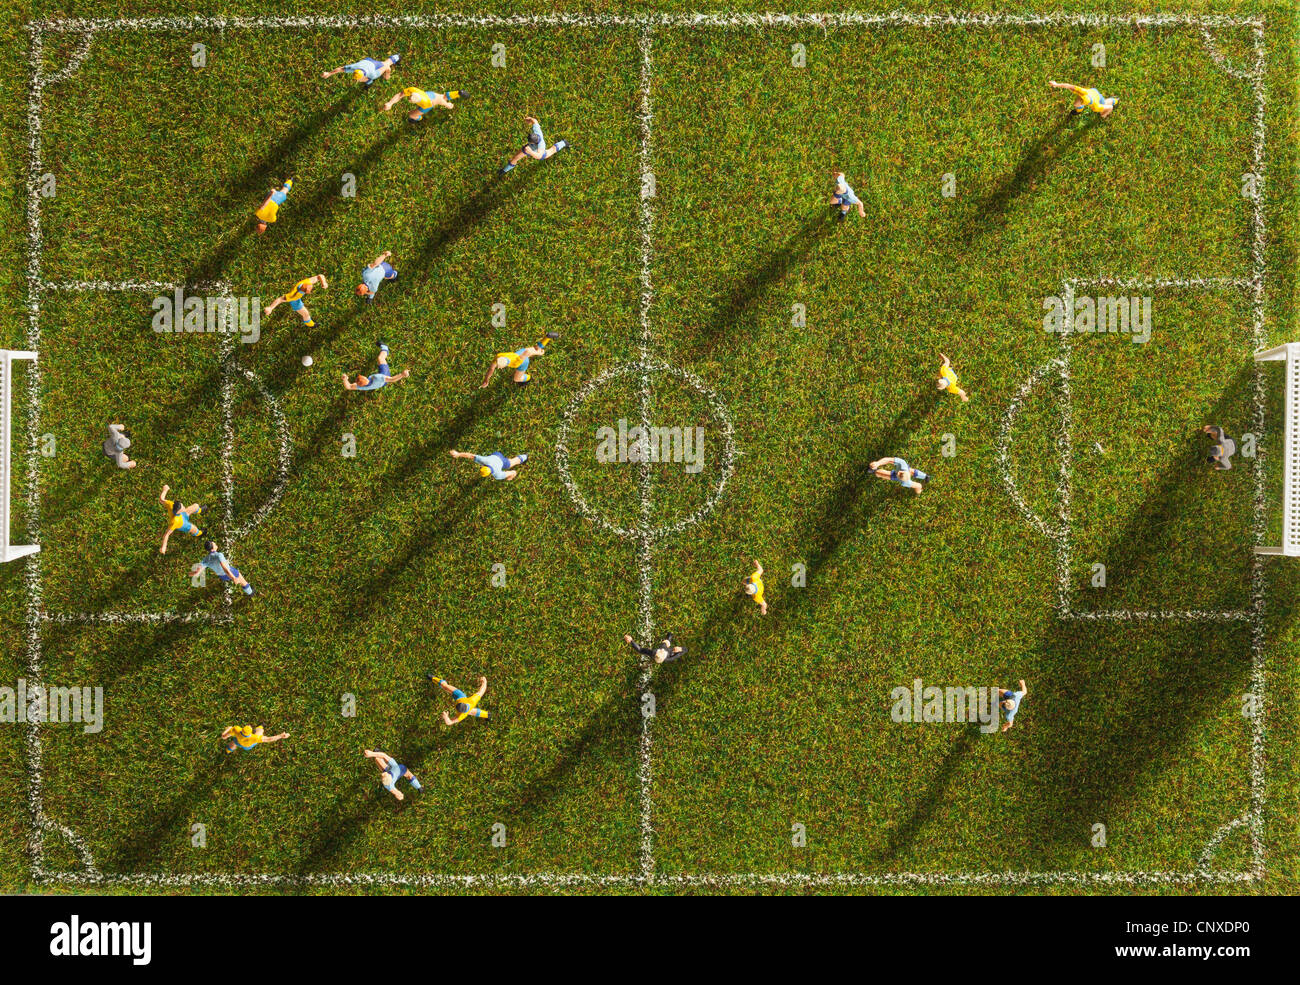 Miniature figurines of two soccer teams playing a soccer match, directly above Stock Photo